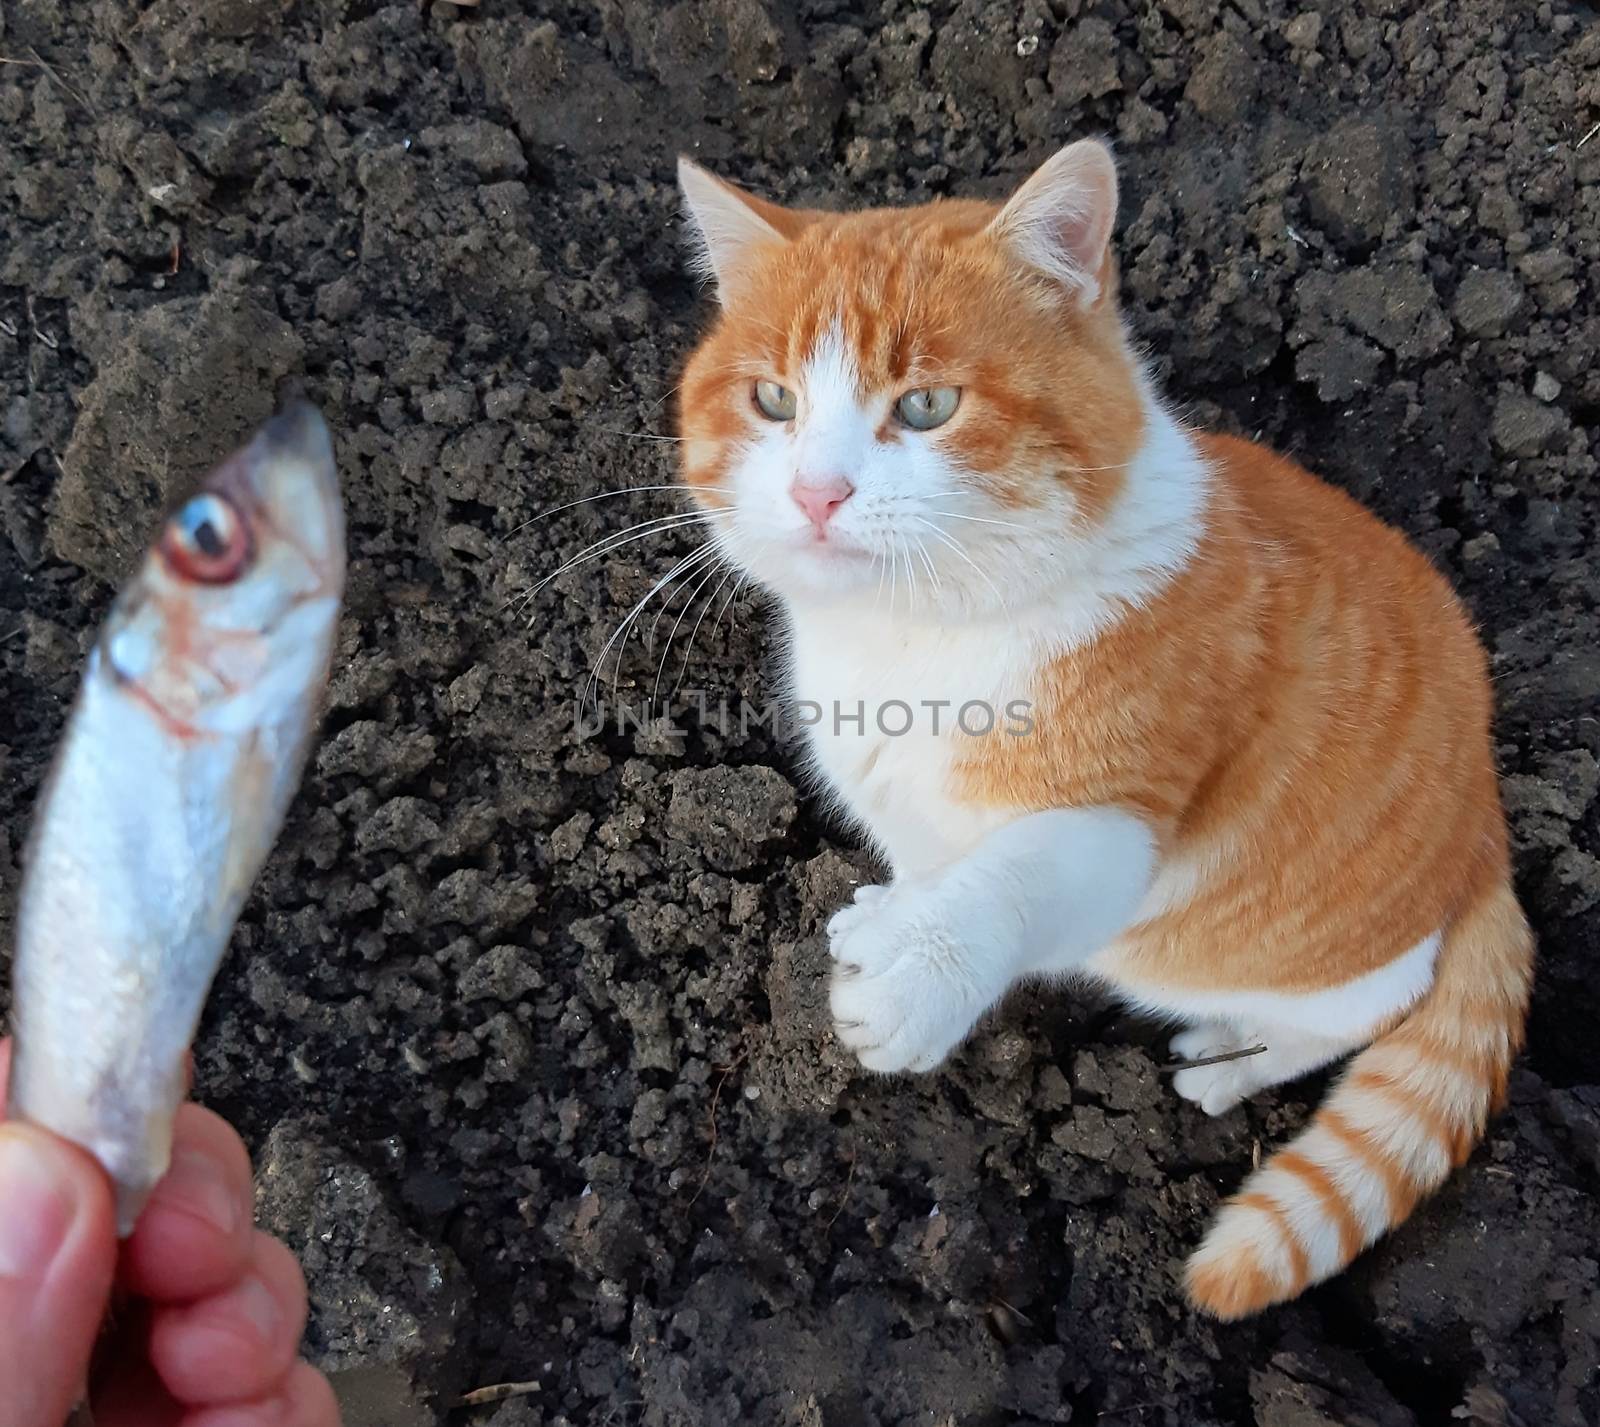 A beautiful cat takes my fish from my hand.